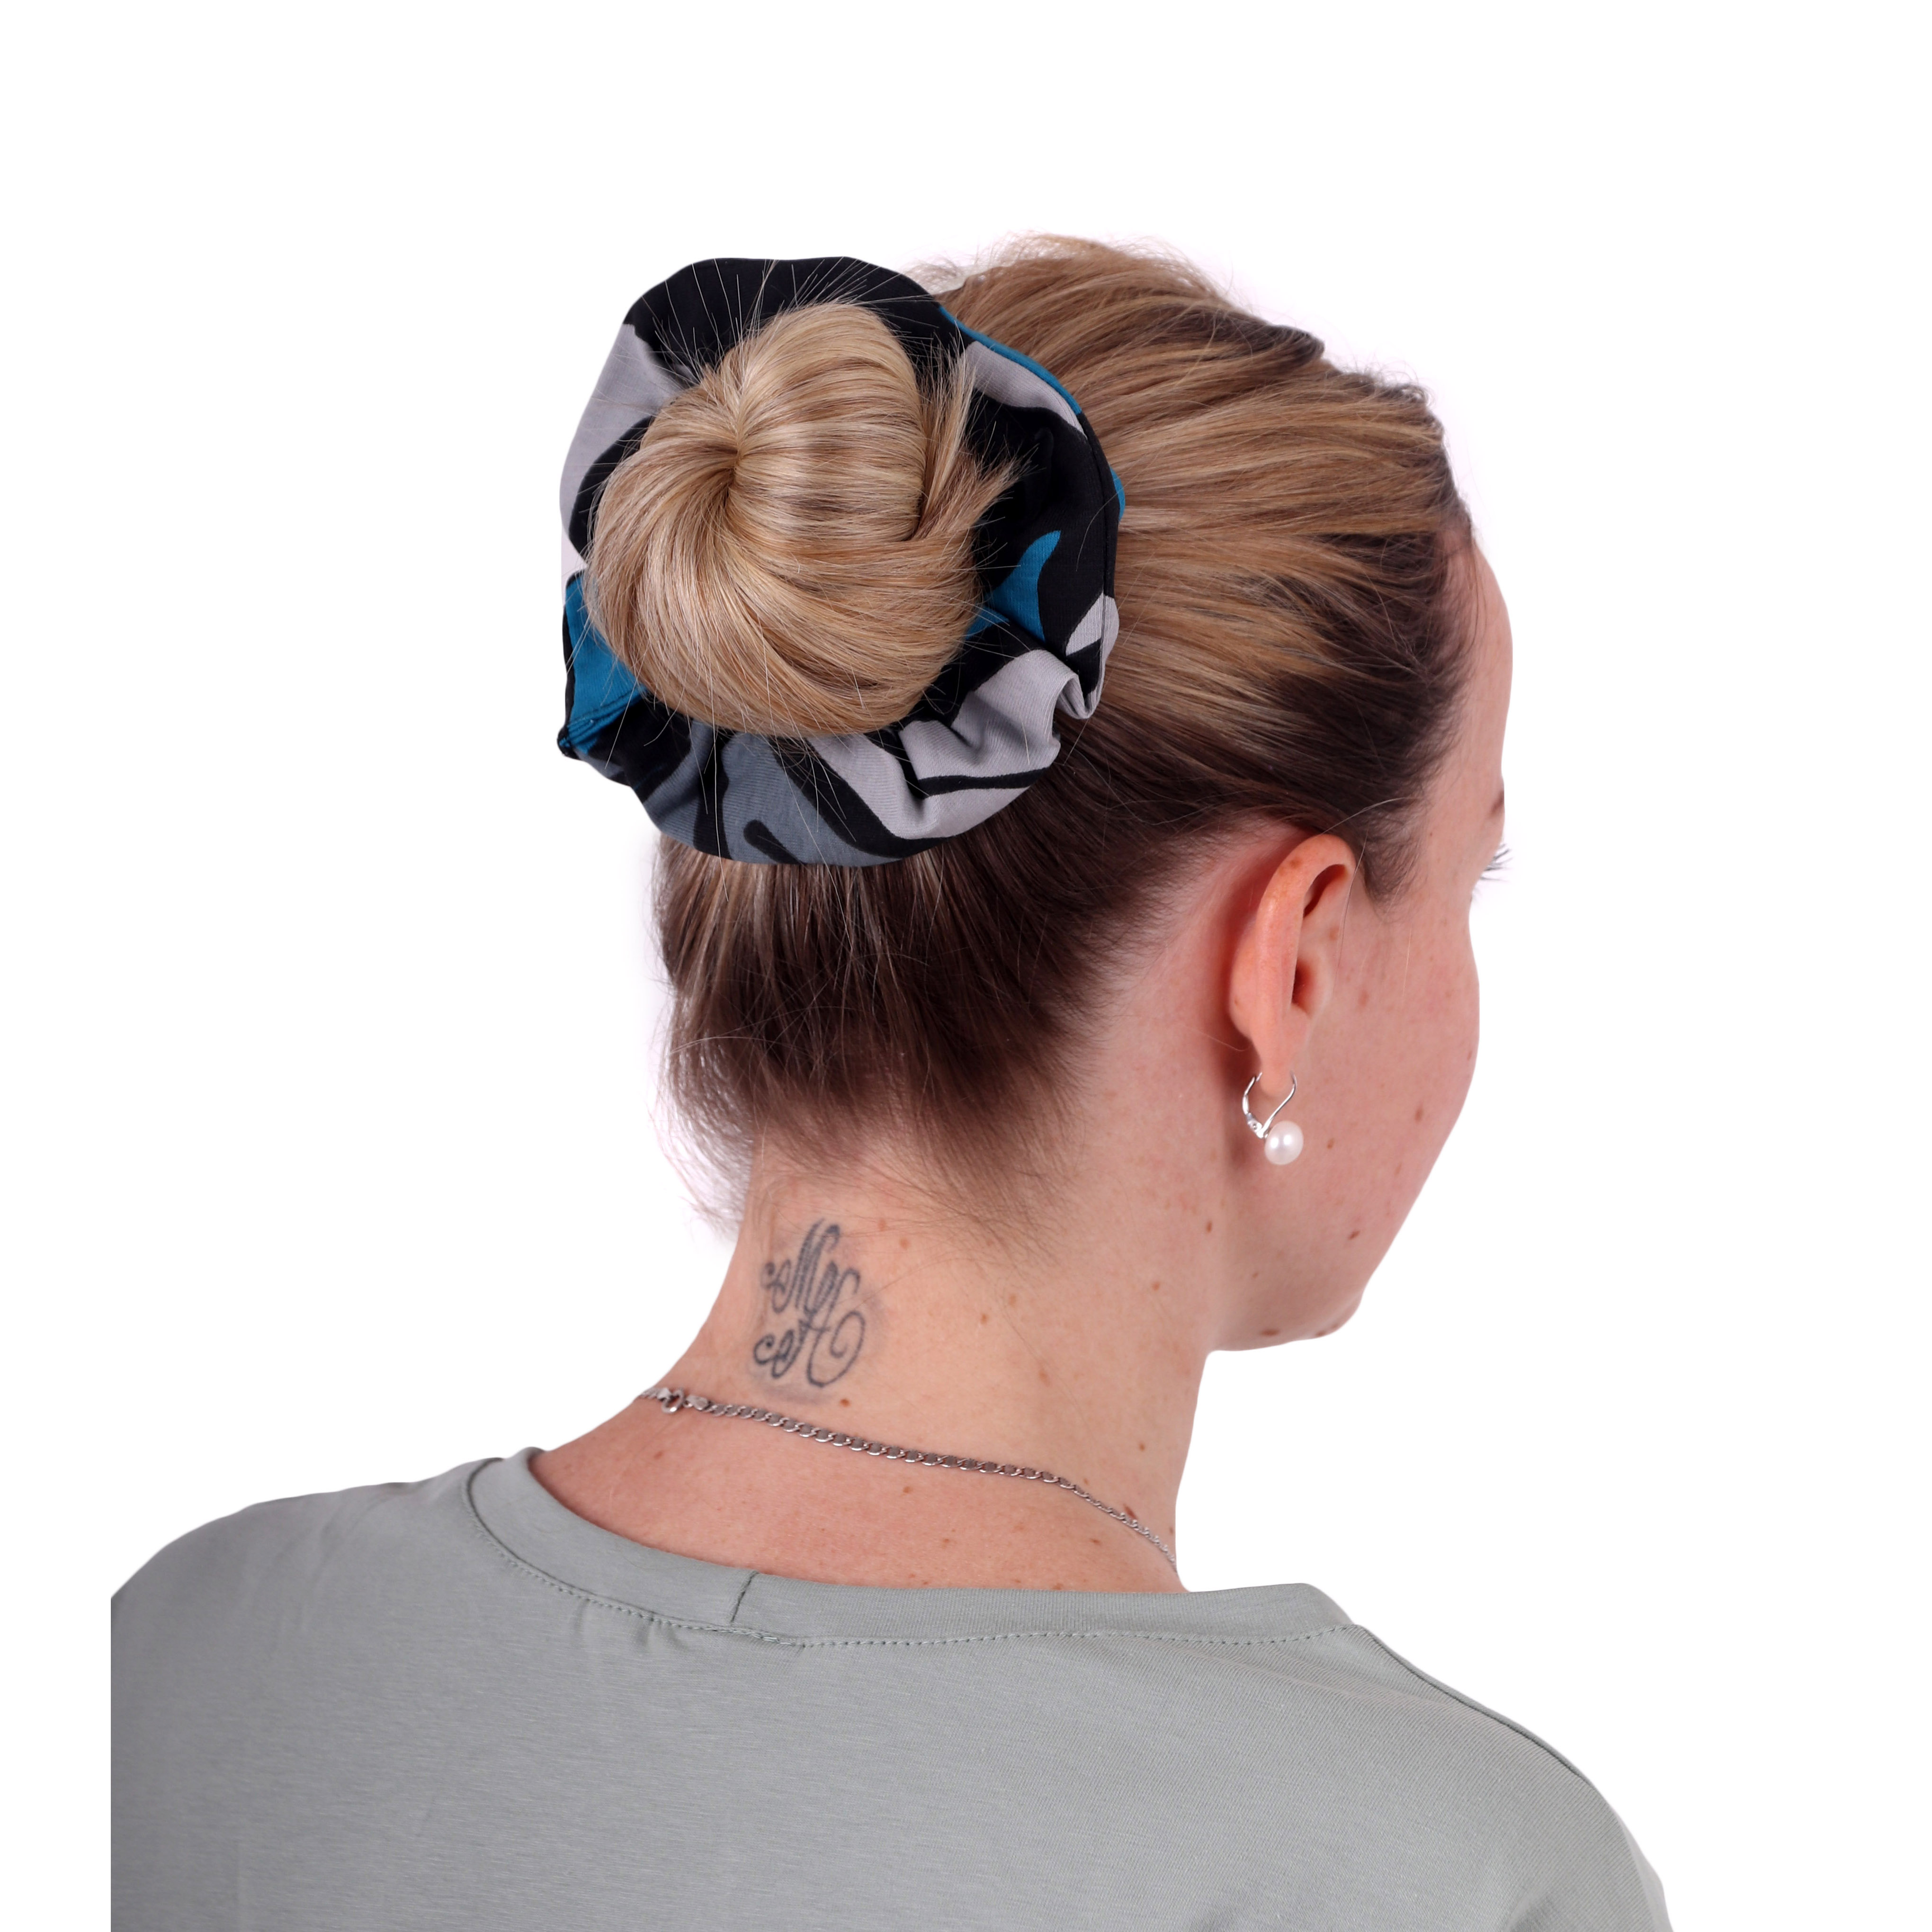 Fabric hair band, big, patterned black-grey-turquoise